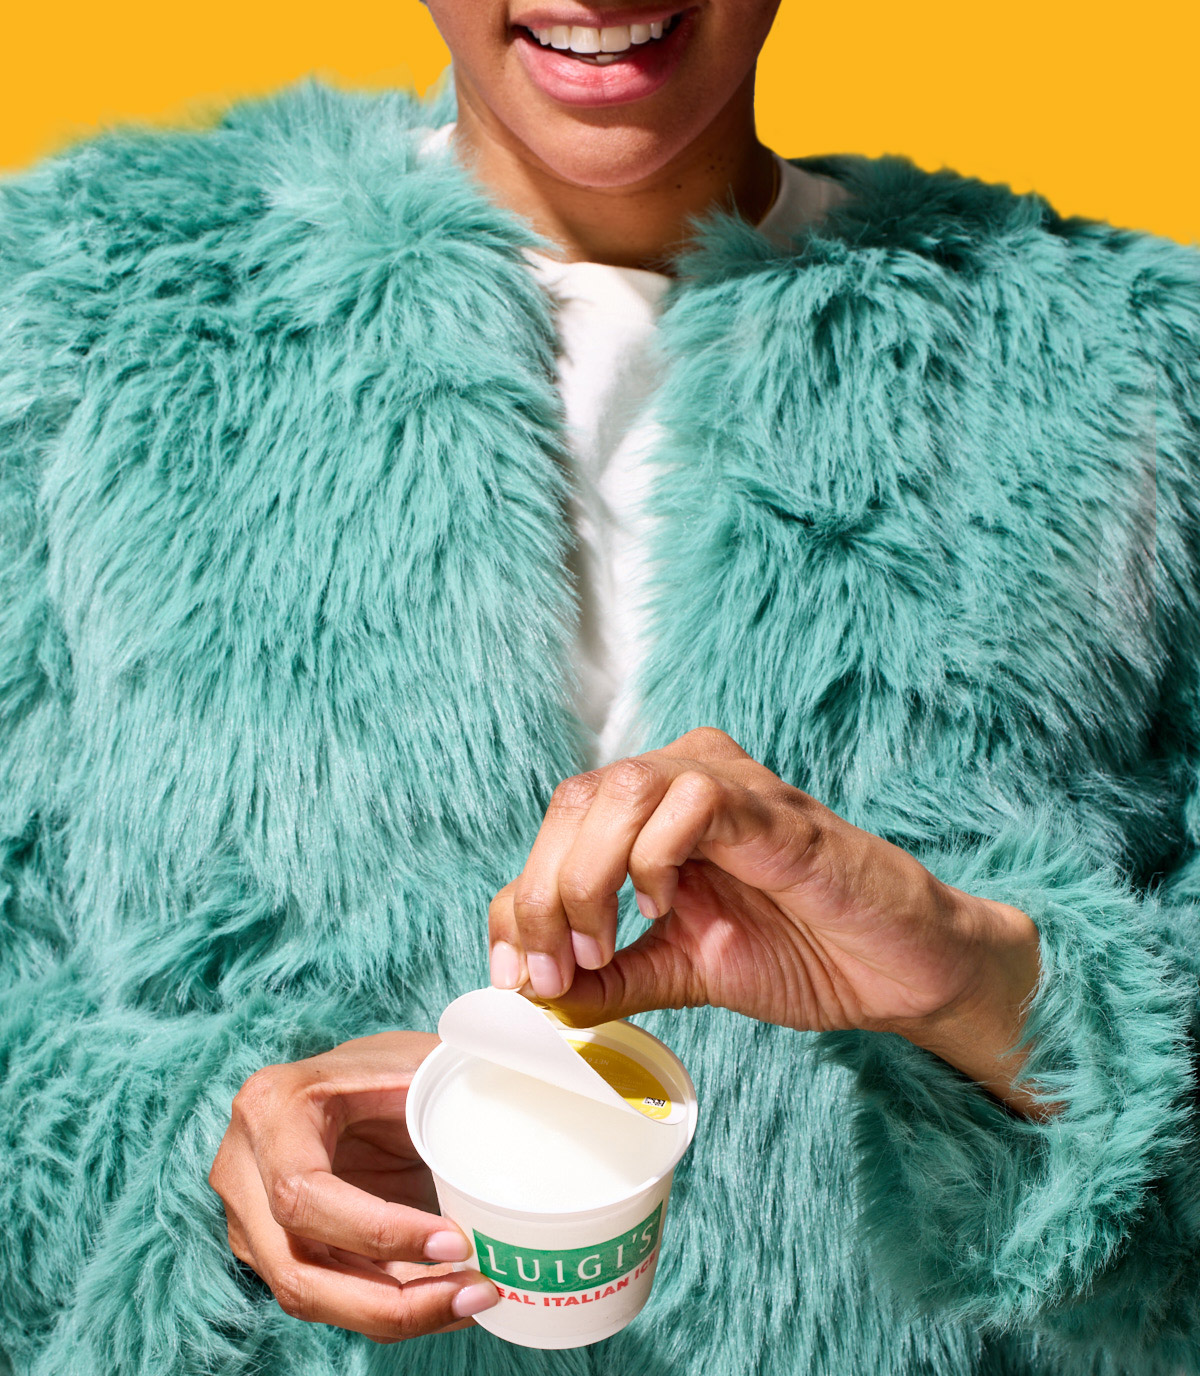 Image of woman opening a cup of lemon LUIGI'S Real Italian Ice. Woman is wearing a blue faux fur jacket. Background is yellow.